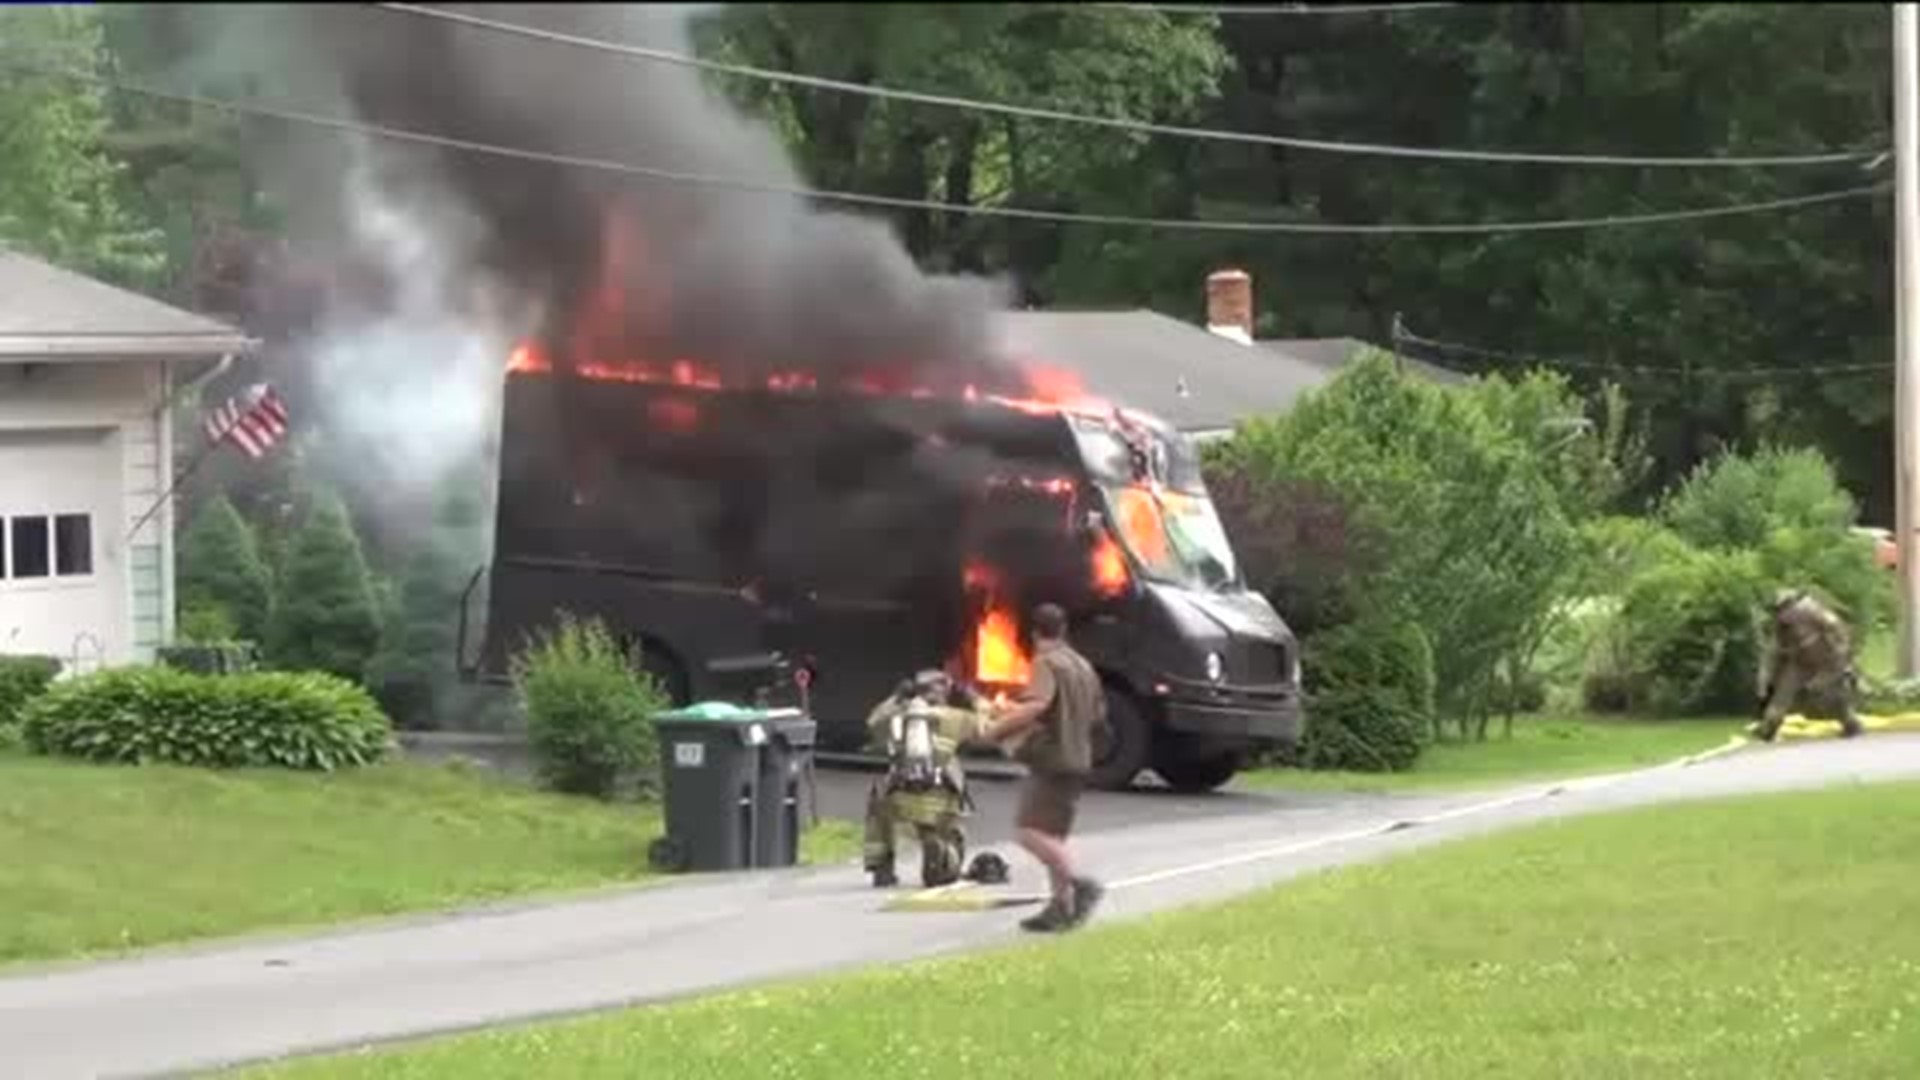 Police Investigate UPS Truck Explosion and Fire